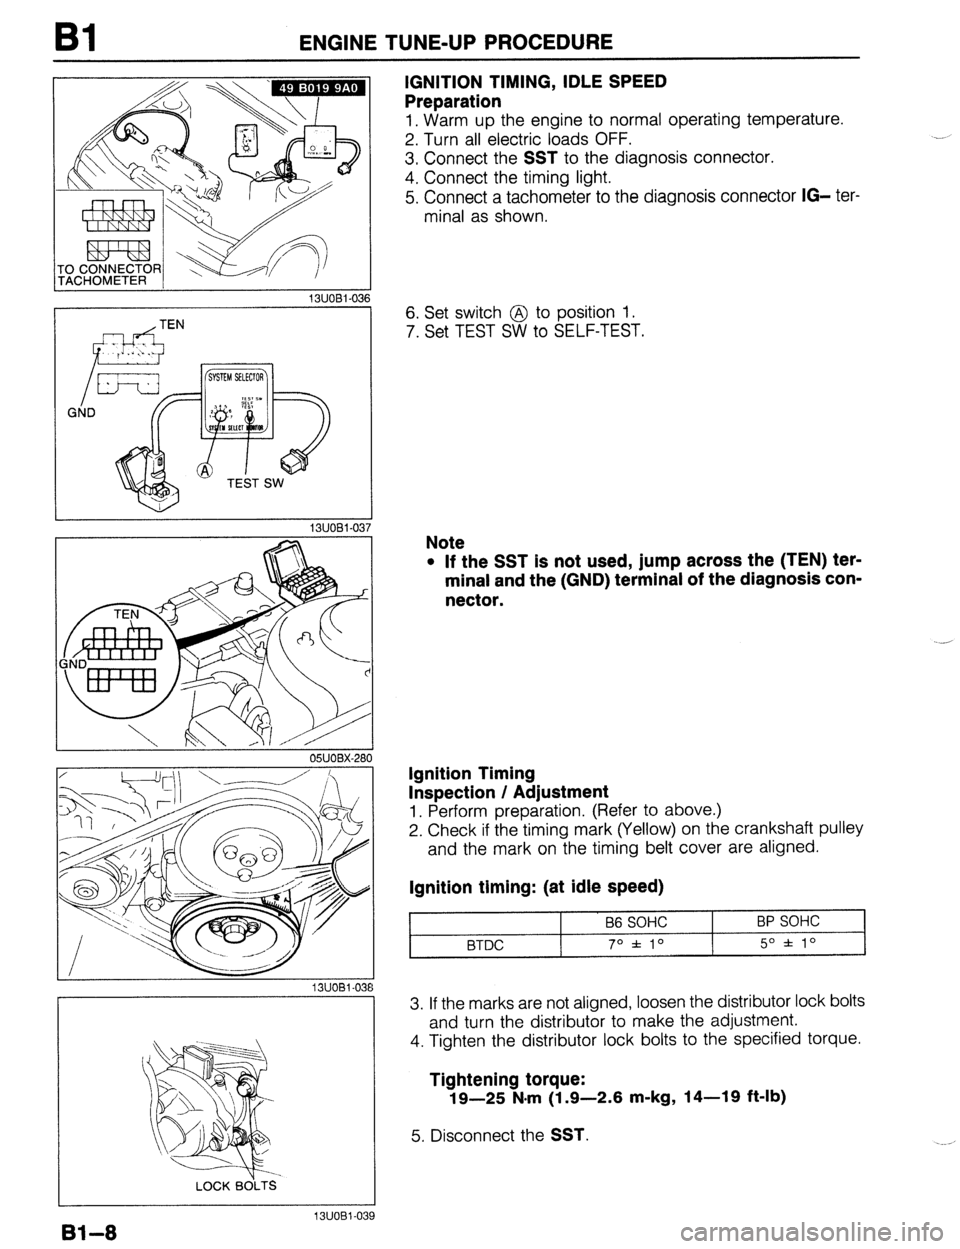 MAZDA PROTEGE 1992 Owners Guide Bl ENGINE TUNE-UP PROCEDURE 
13UOBi-036 
-i 
OWOBX-261 
13UOBl-08 
LOCK BOLTS 
IGNITION TIMING, IDLE SPEED 
Preparation 
1, Warm up the engine to normal operating temperature. 
2. Turn all electric lo